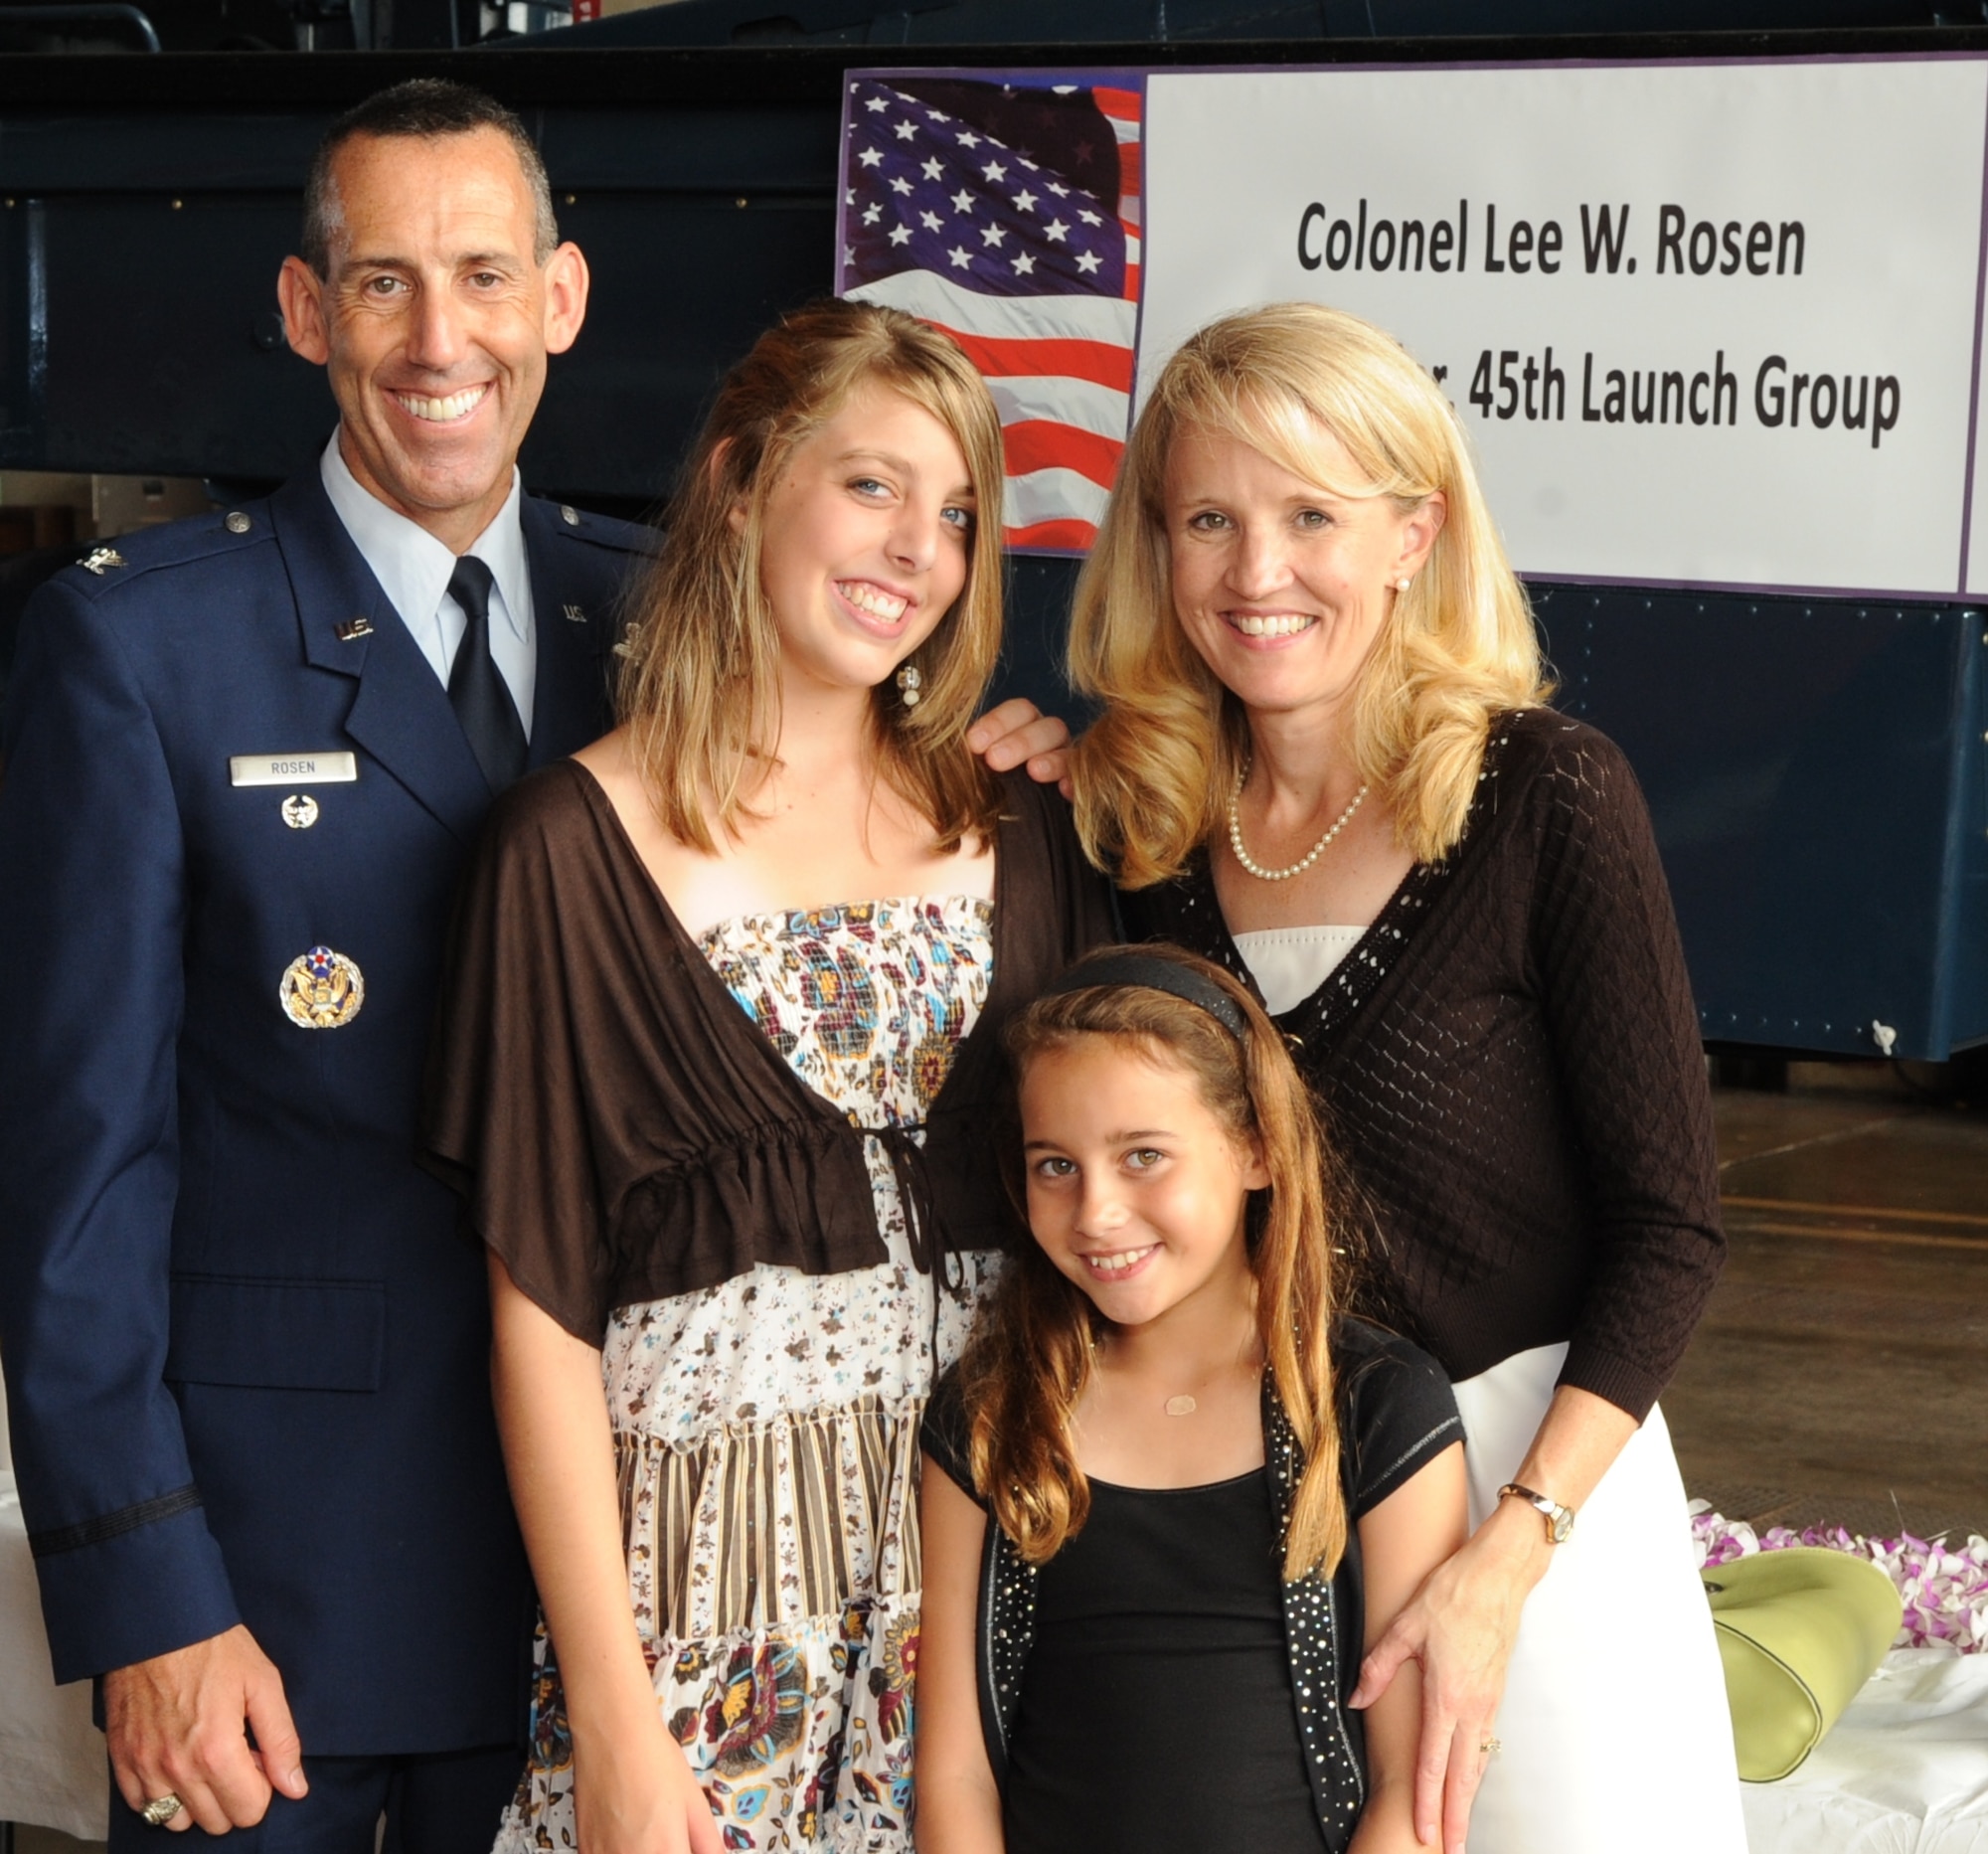 Col. Lee W. Rosen, with wife Dorothea and daughters Emma, left,
and Lili, right. “There’s no question that my greatest success is my
beautiful family. Family is the reason that we all do what we do; to
ensure we serve and protect them and our way of life.”
